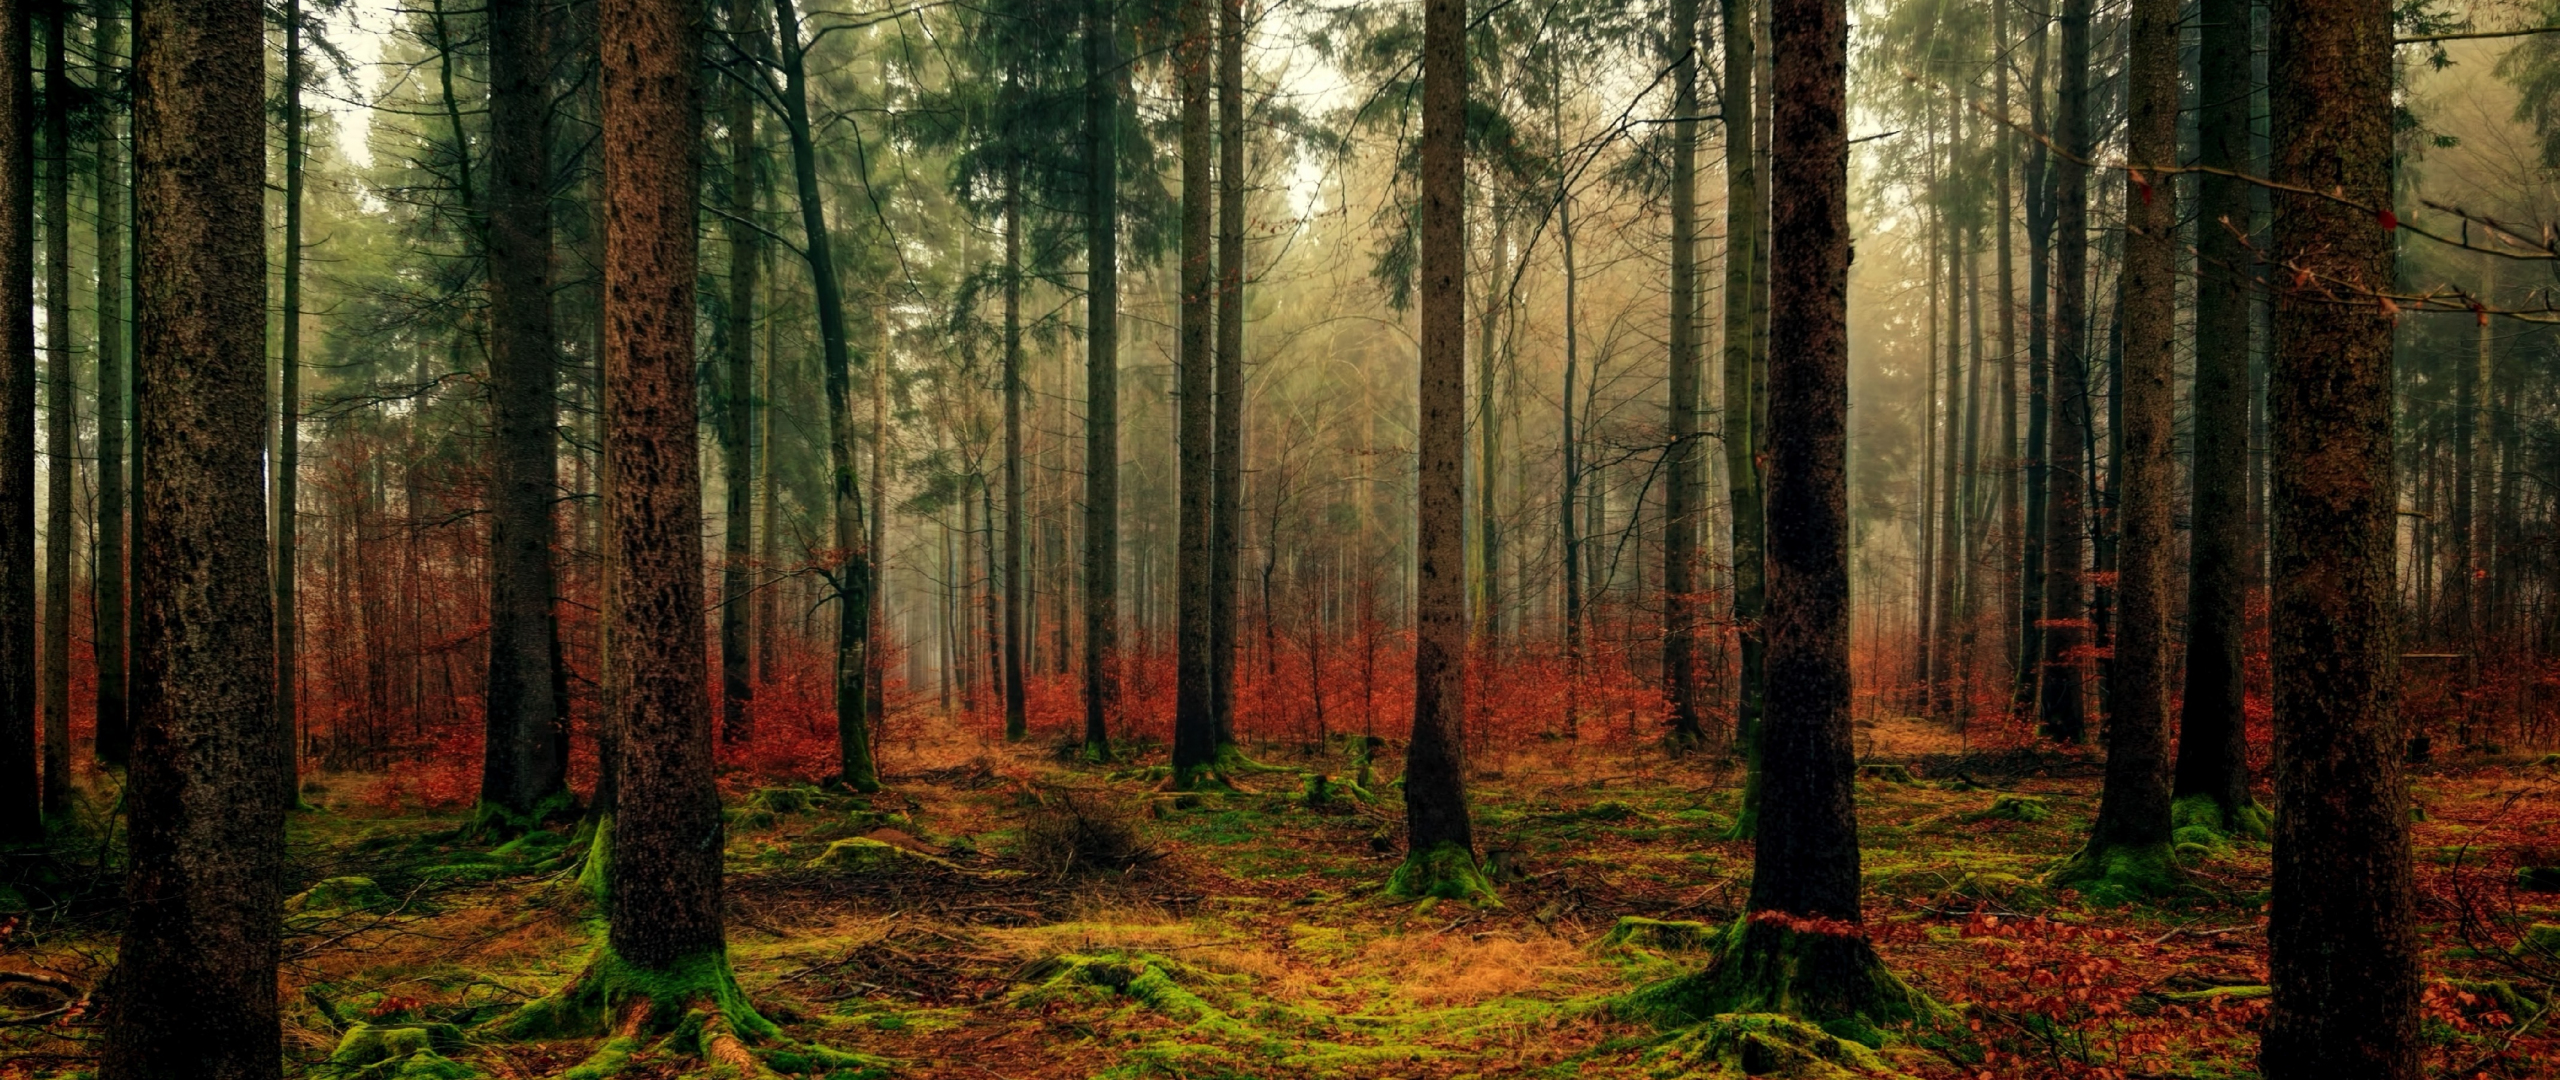 Download 2560x1080 Wallpaper Forest Haze Moss Nature Tree Dual Wide Widescreen 2560x1080 Hd Image Background 2352